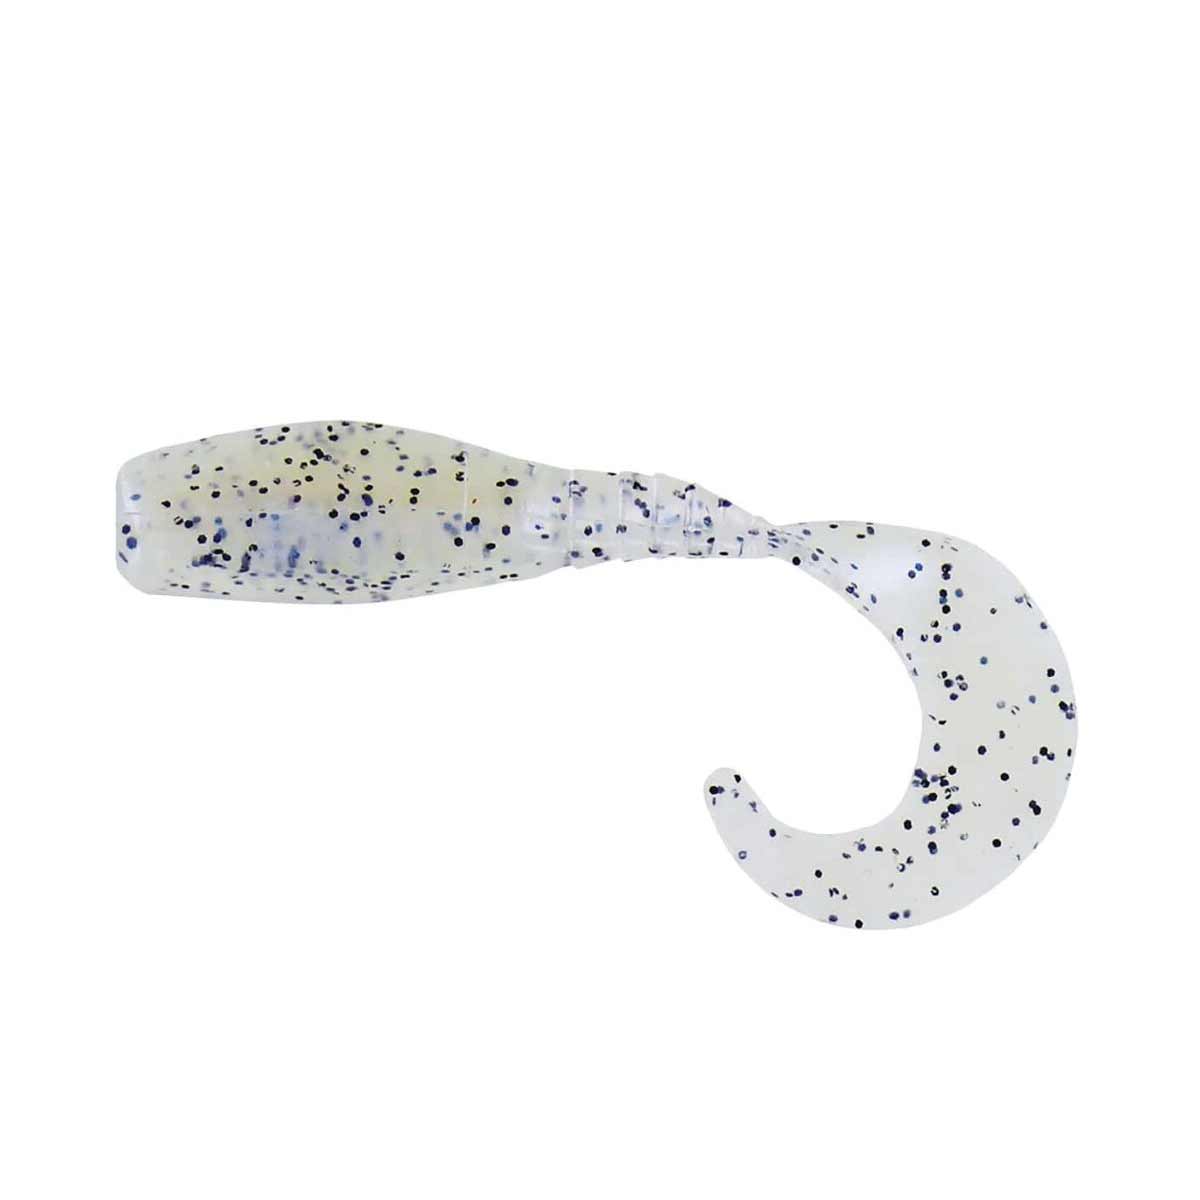 Curly Tail Crappie Minnow_Blue Pearl Pepper